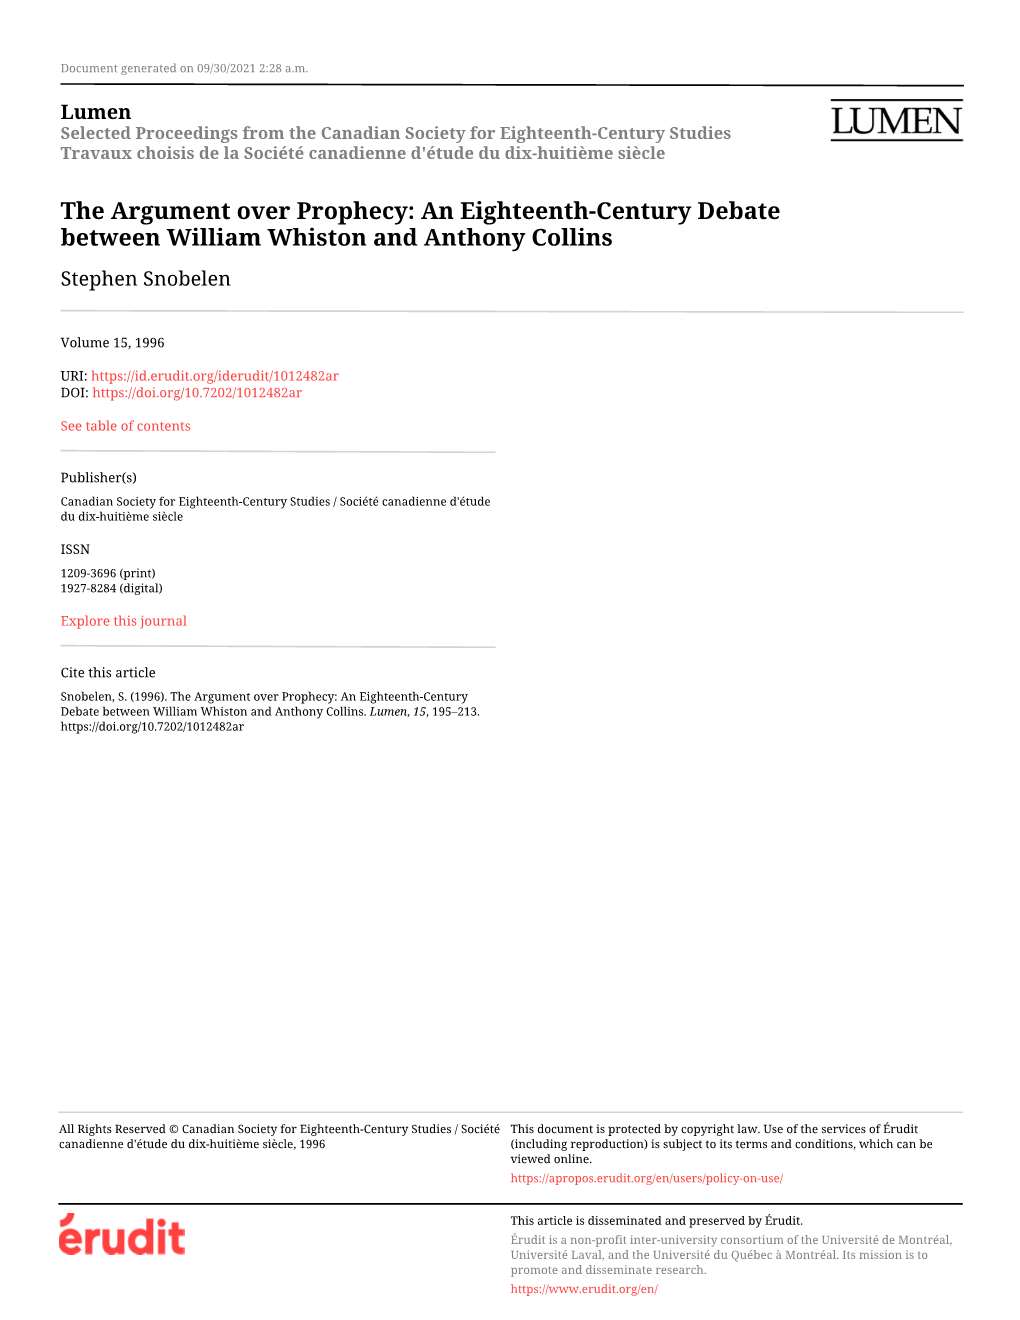 The Argument Over Prophecy: an Eighteenth-Century Debate Between William Whiston and Anthony Collins Stephen Snobelen